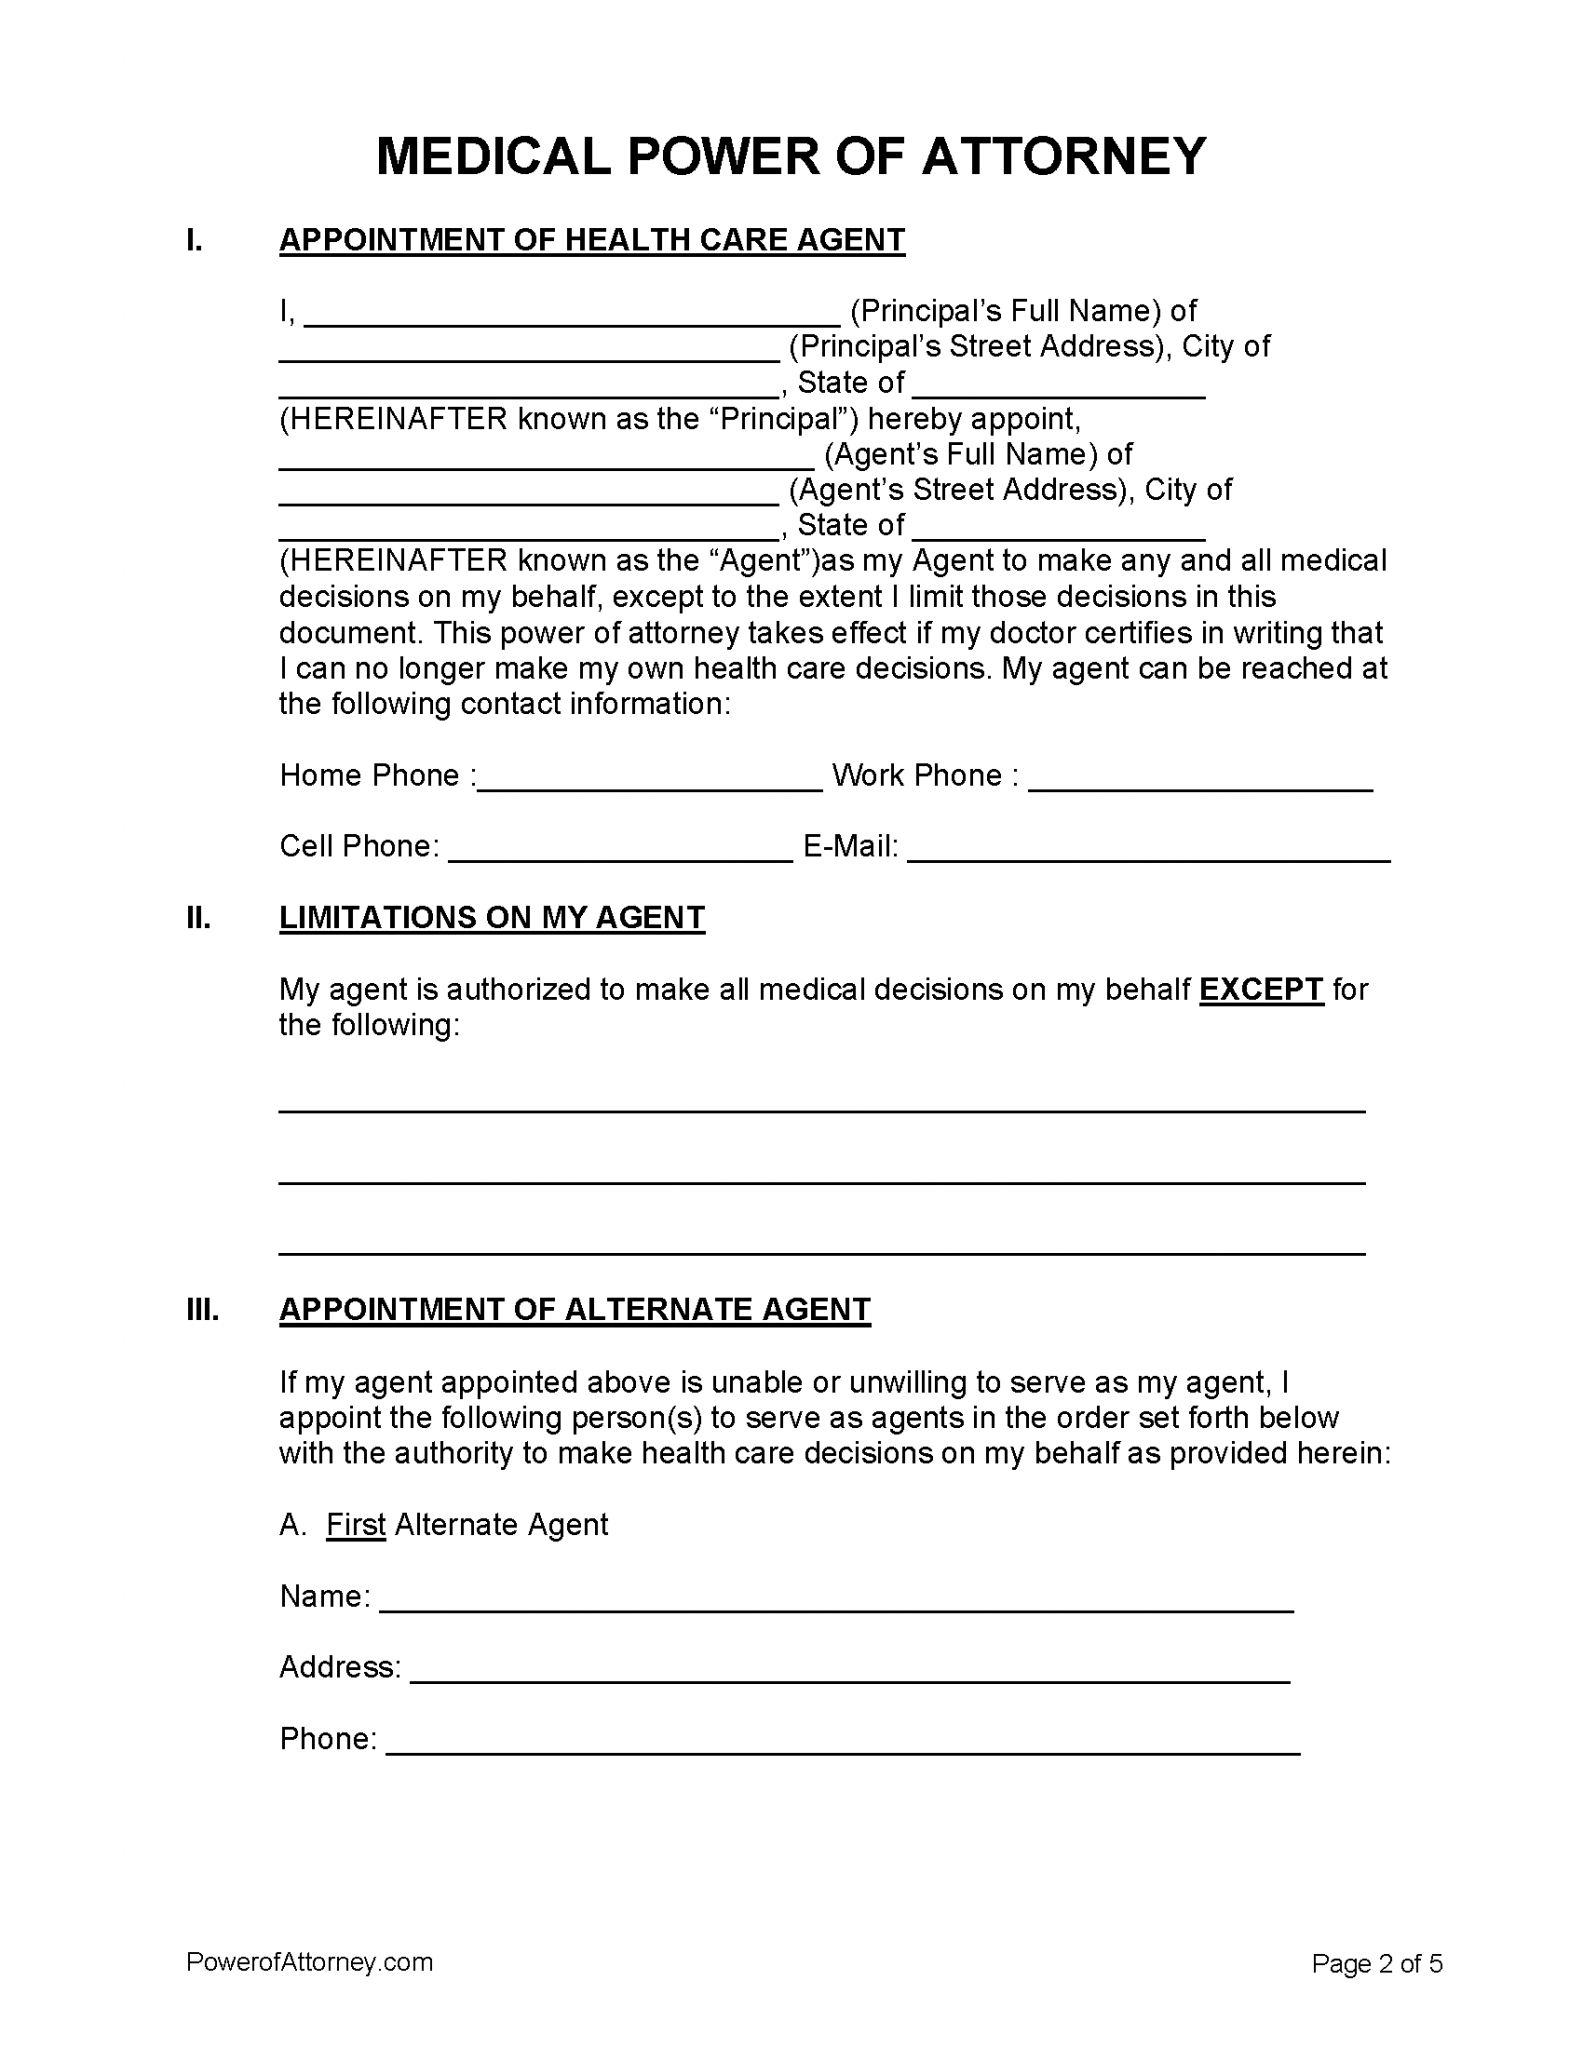 printable-medical-power-of-attorney